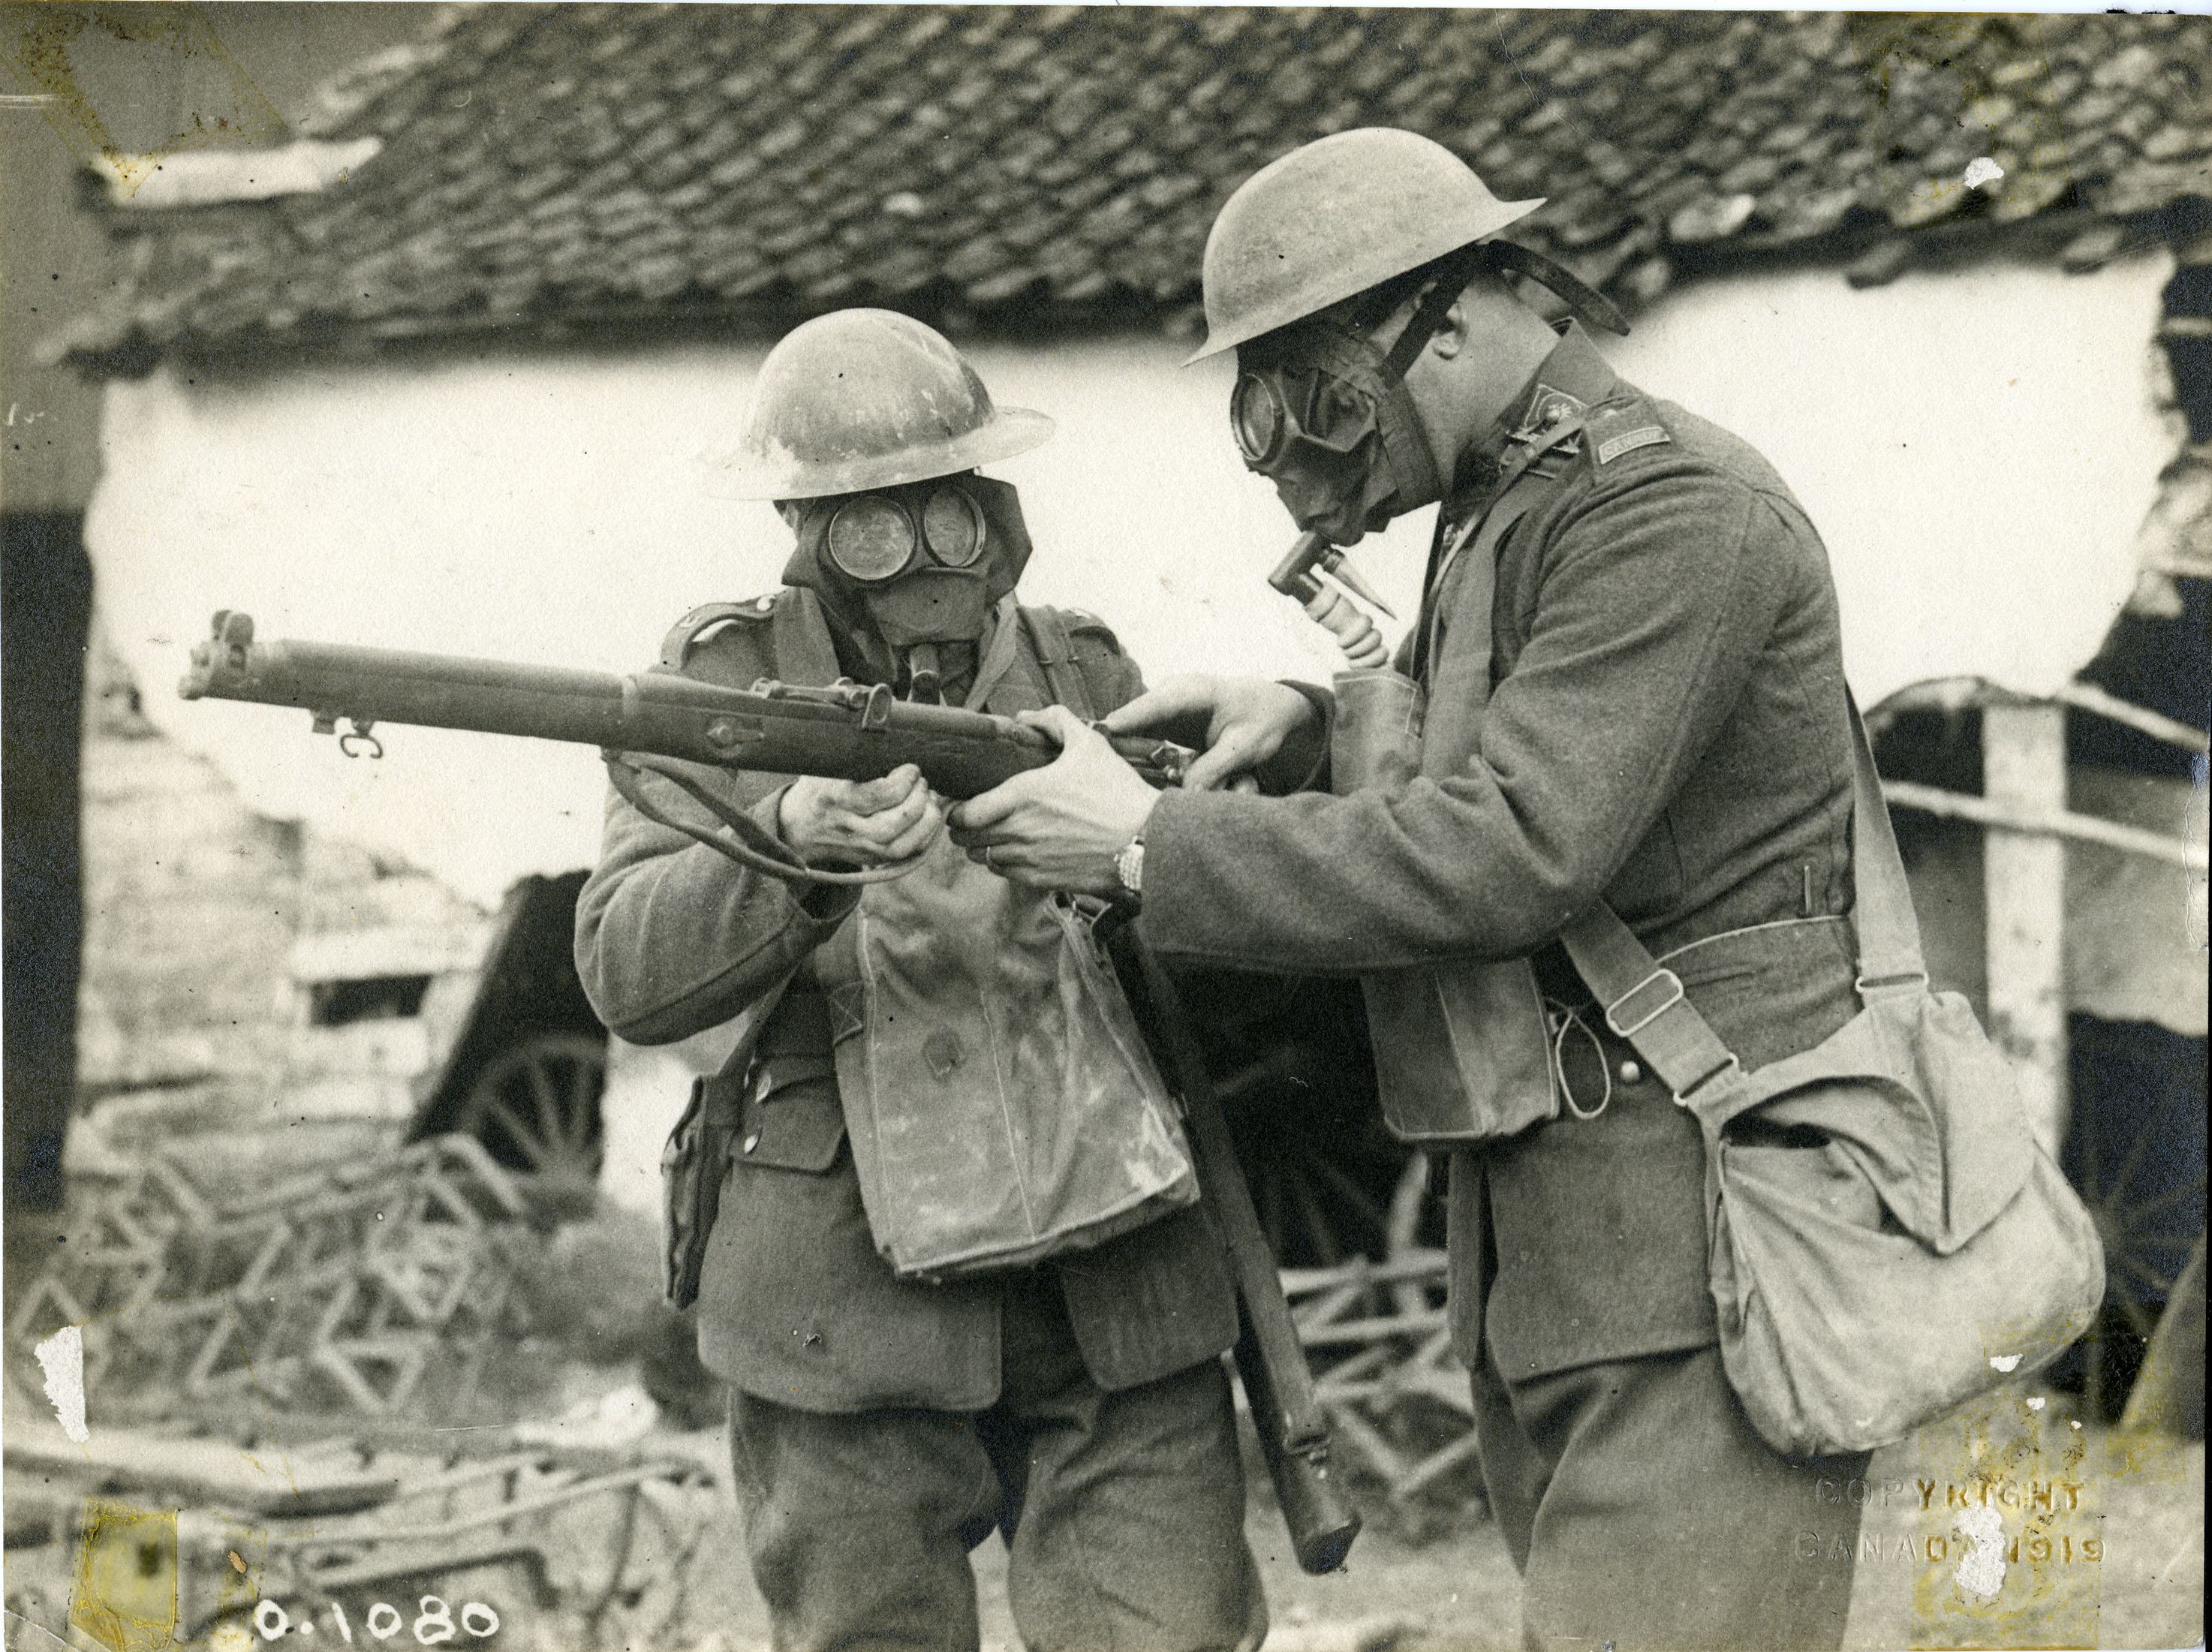 FRIGHTENING TIMES - Two Canadian soldiers inspecting a rifle while wearing gas masks in Northern France during the First World War.